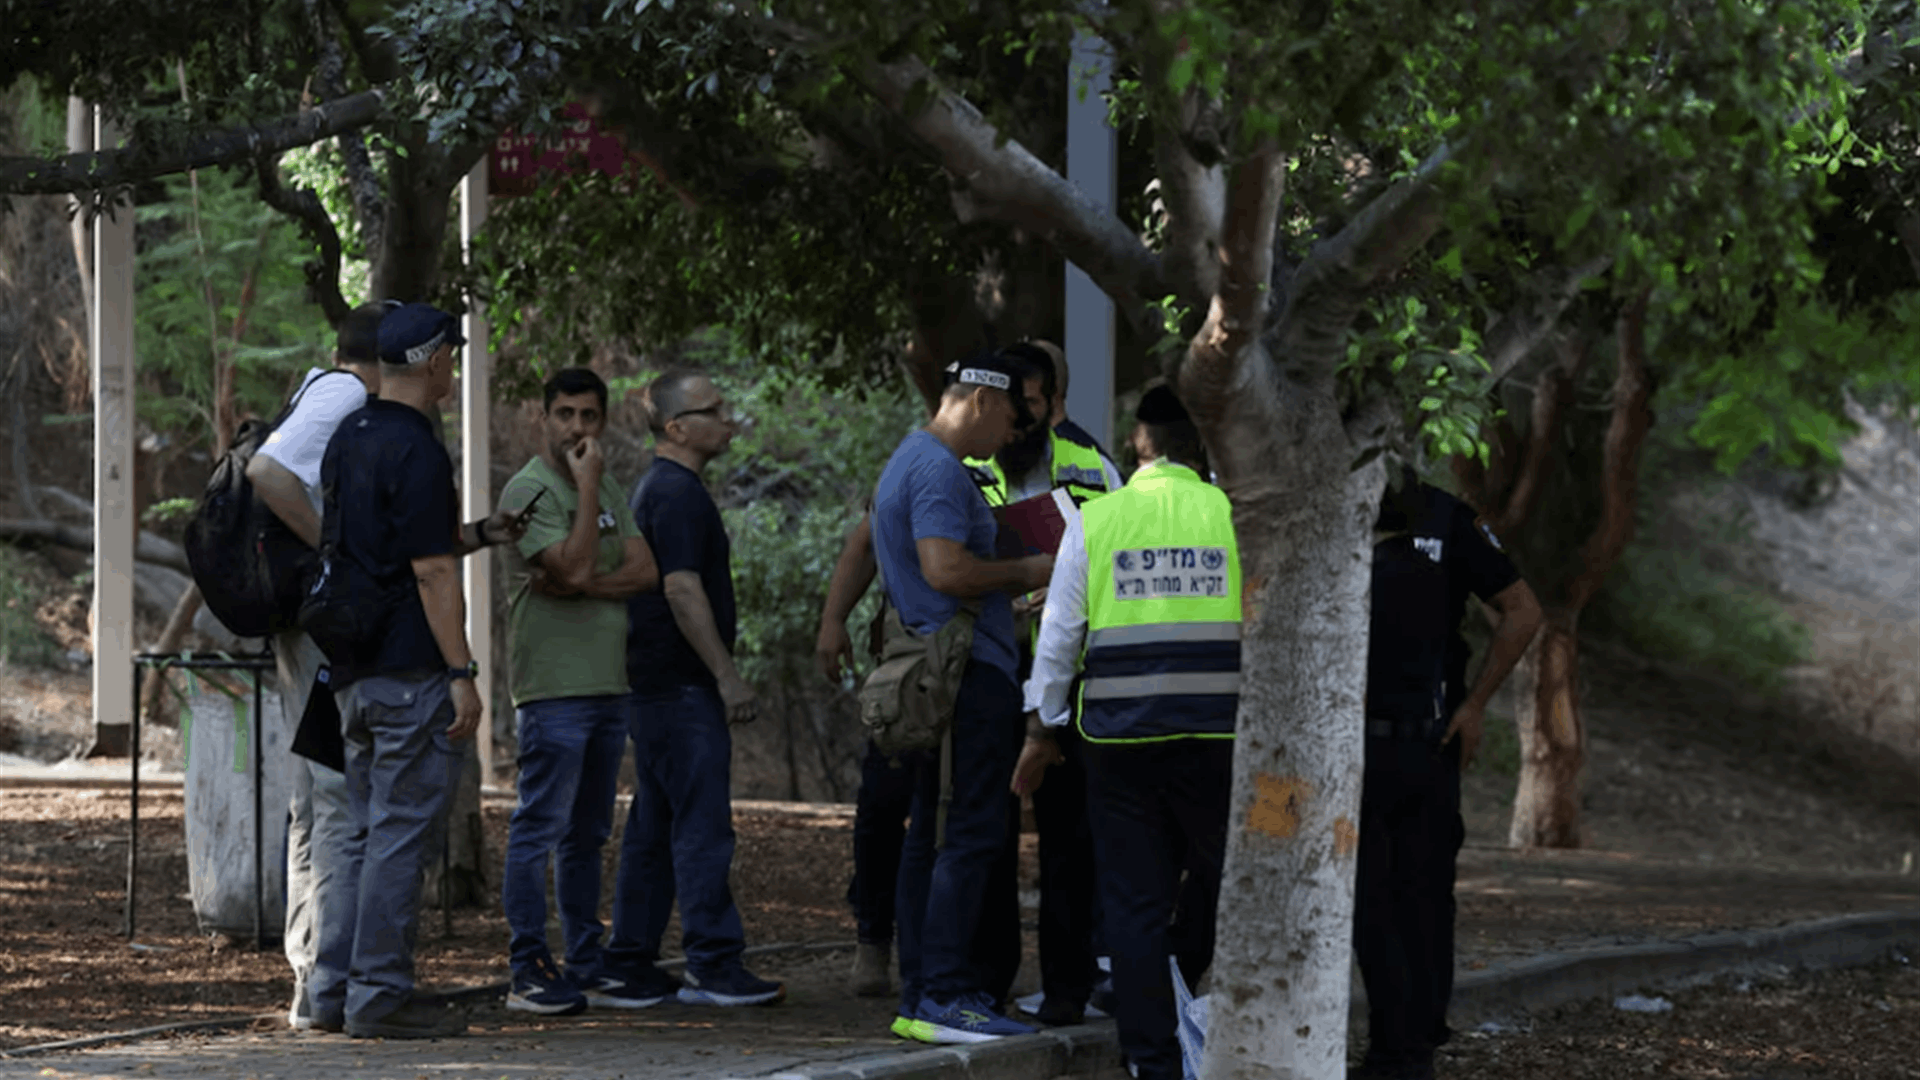 Two people killed in stabbing attack in Israel